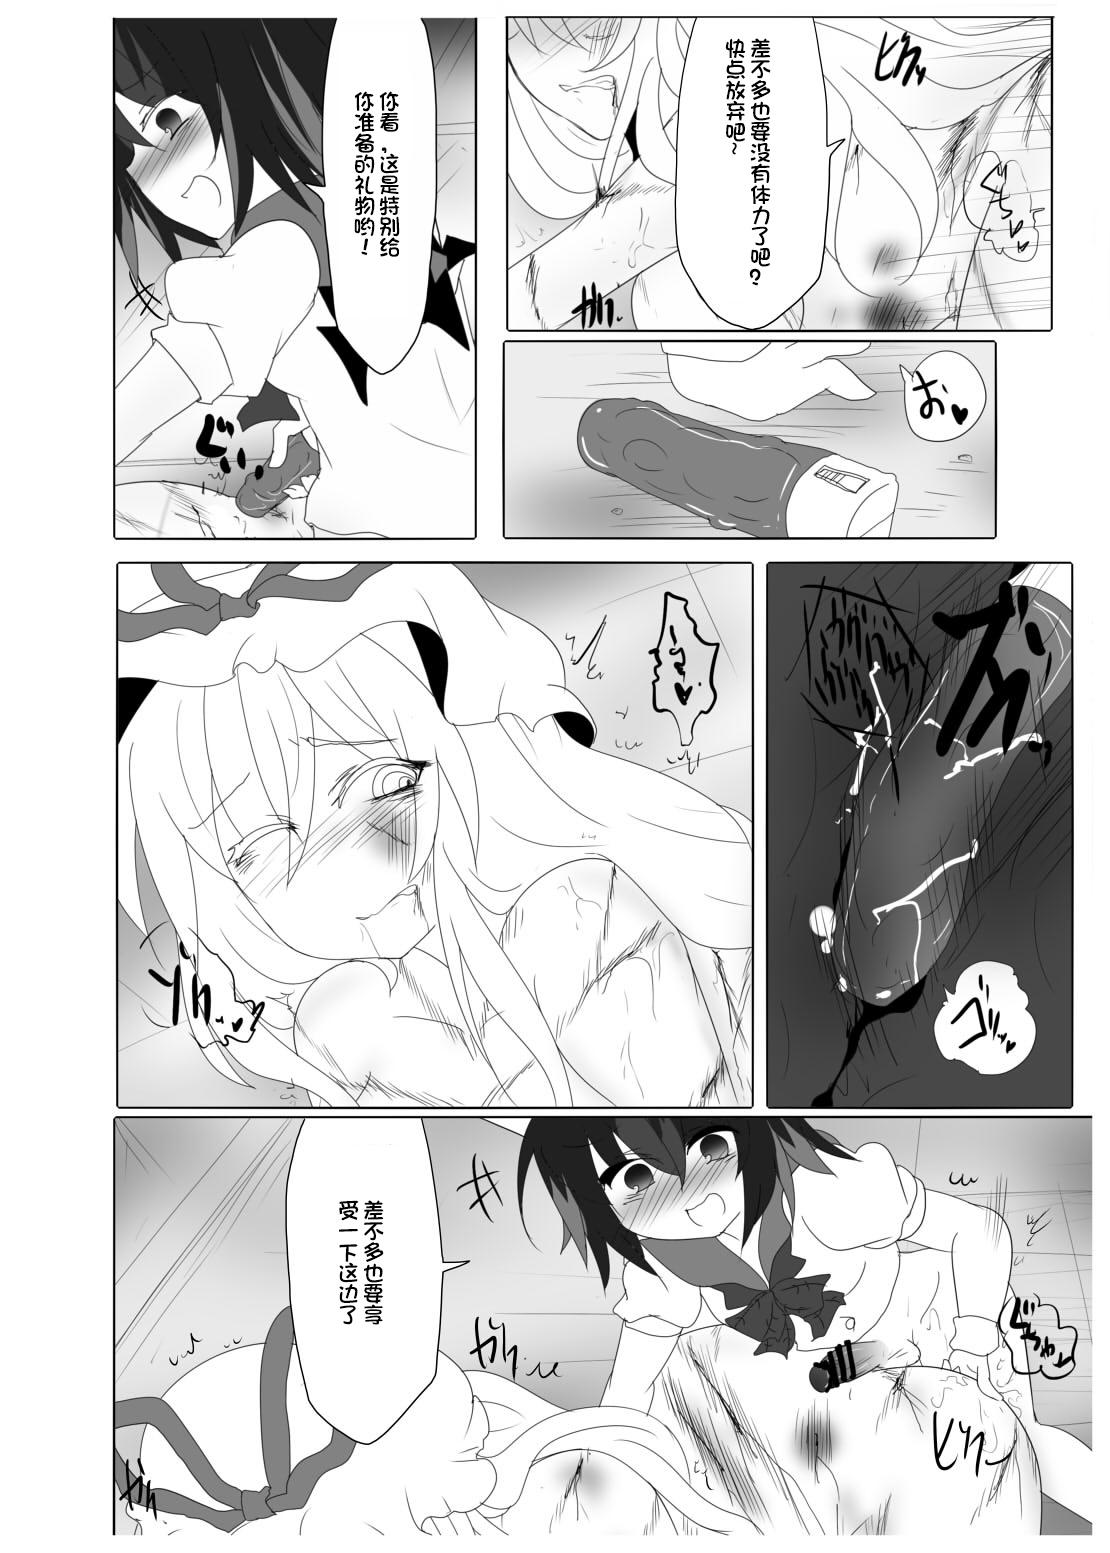 Kink 拷問アマノジャクゴールドラッシュ - Touhou project Women Sucking - Page 12